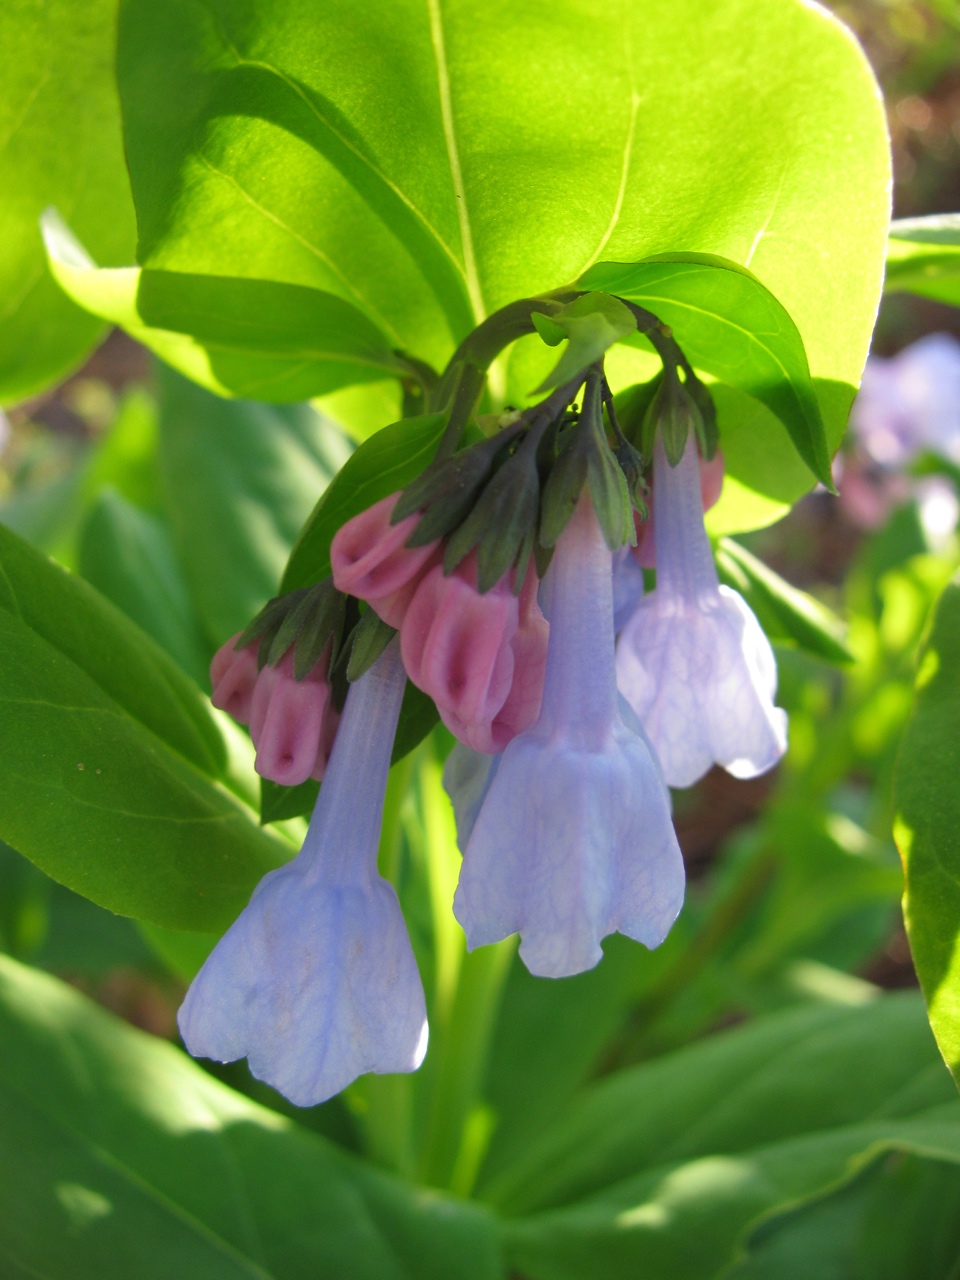 The Scientific Name is Mertensia virginica. You will likely hear them called Virginia Bluebells, Virginia Cowslip. This picture shows the Buds and flowers can range from pink to Carolina-blue and all colors in-between of Mertensia virginica